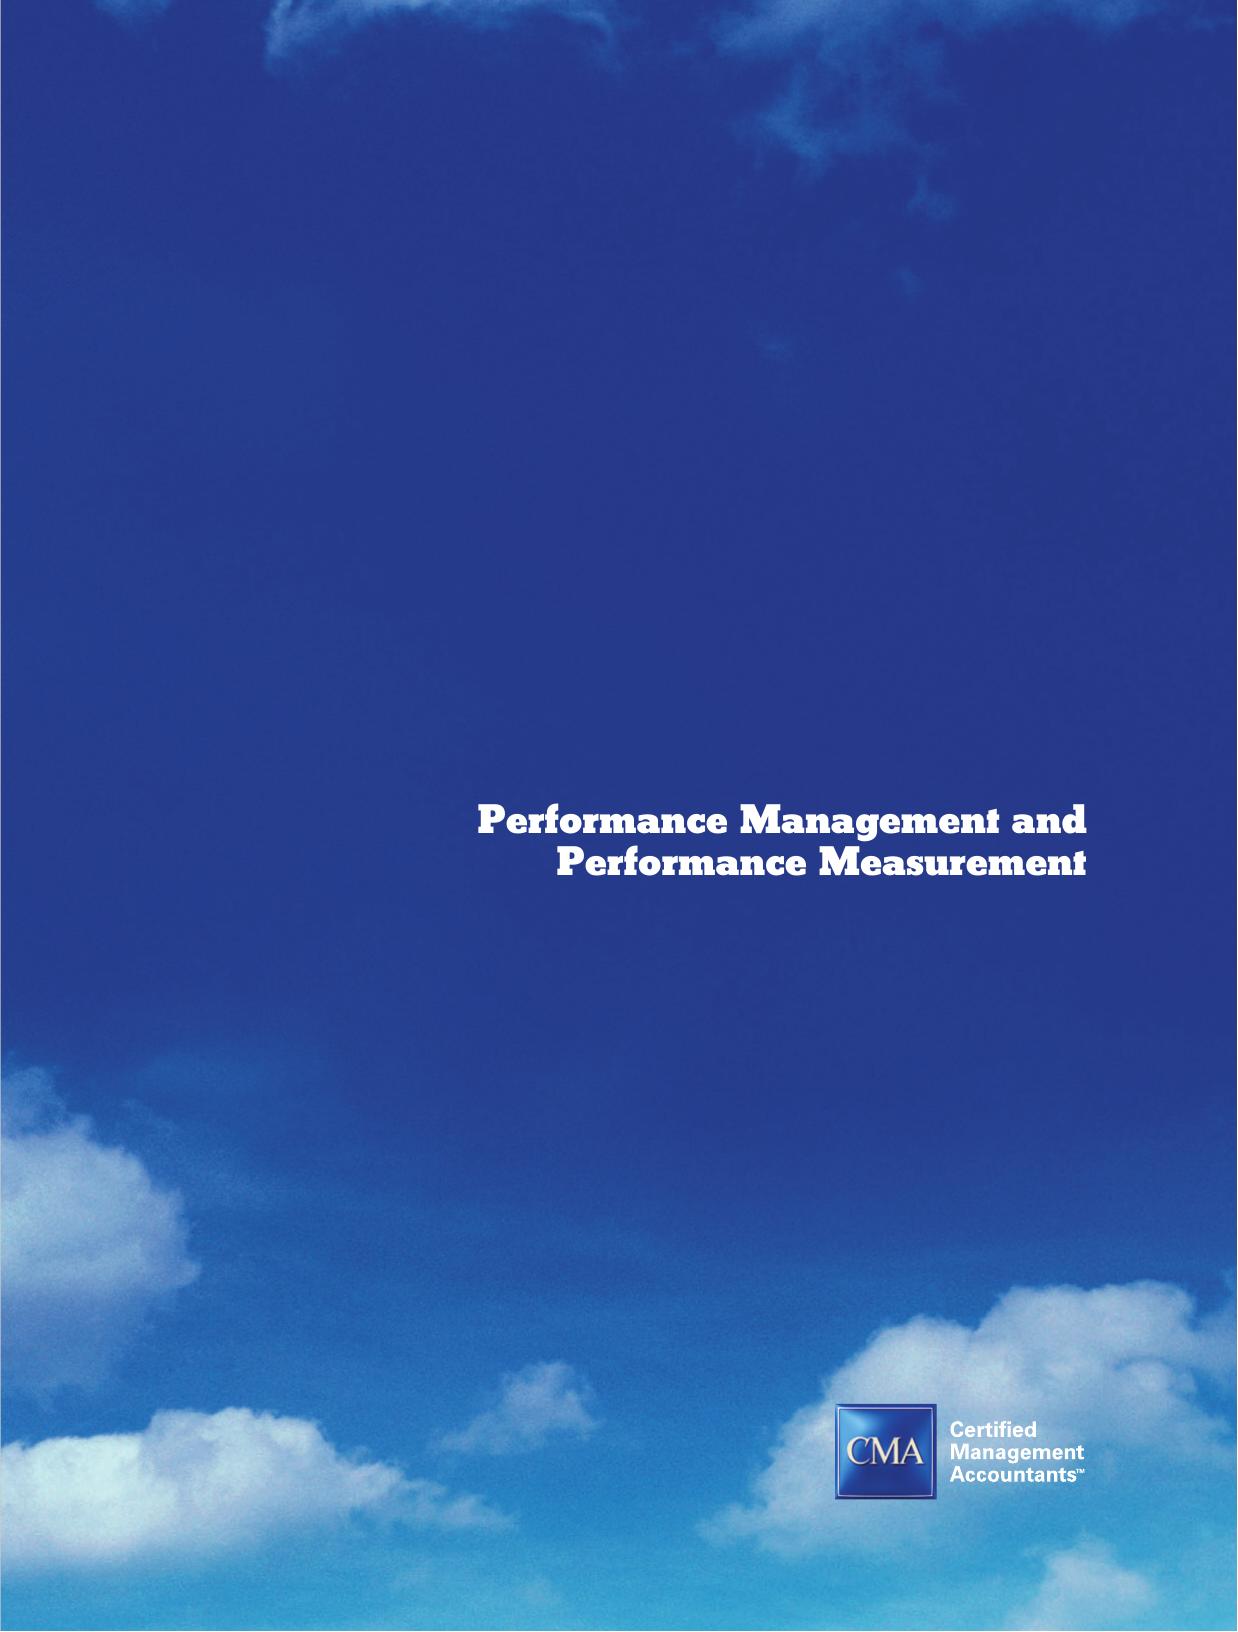 Performance Management and Performance Measurement